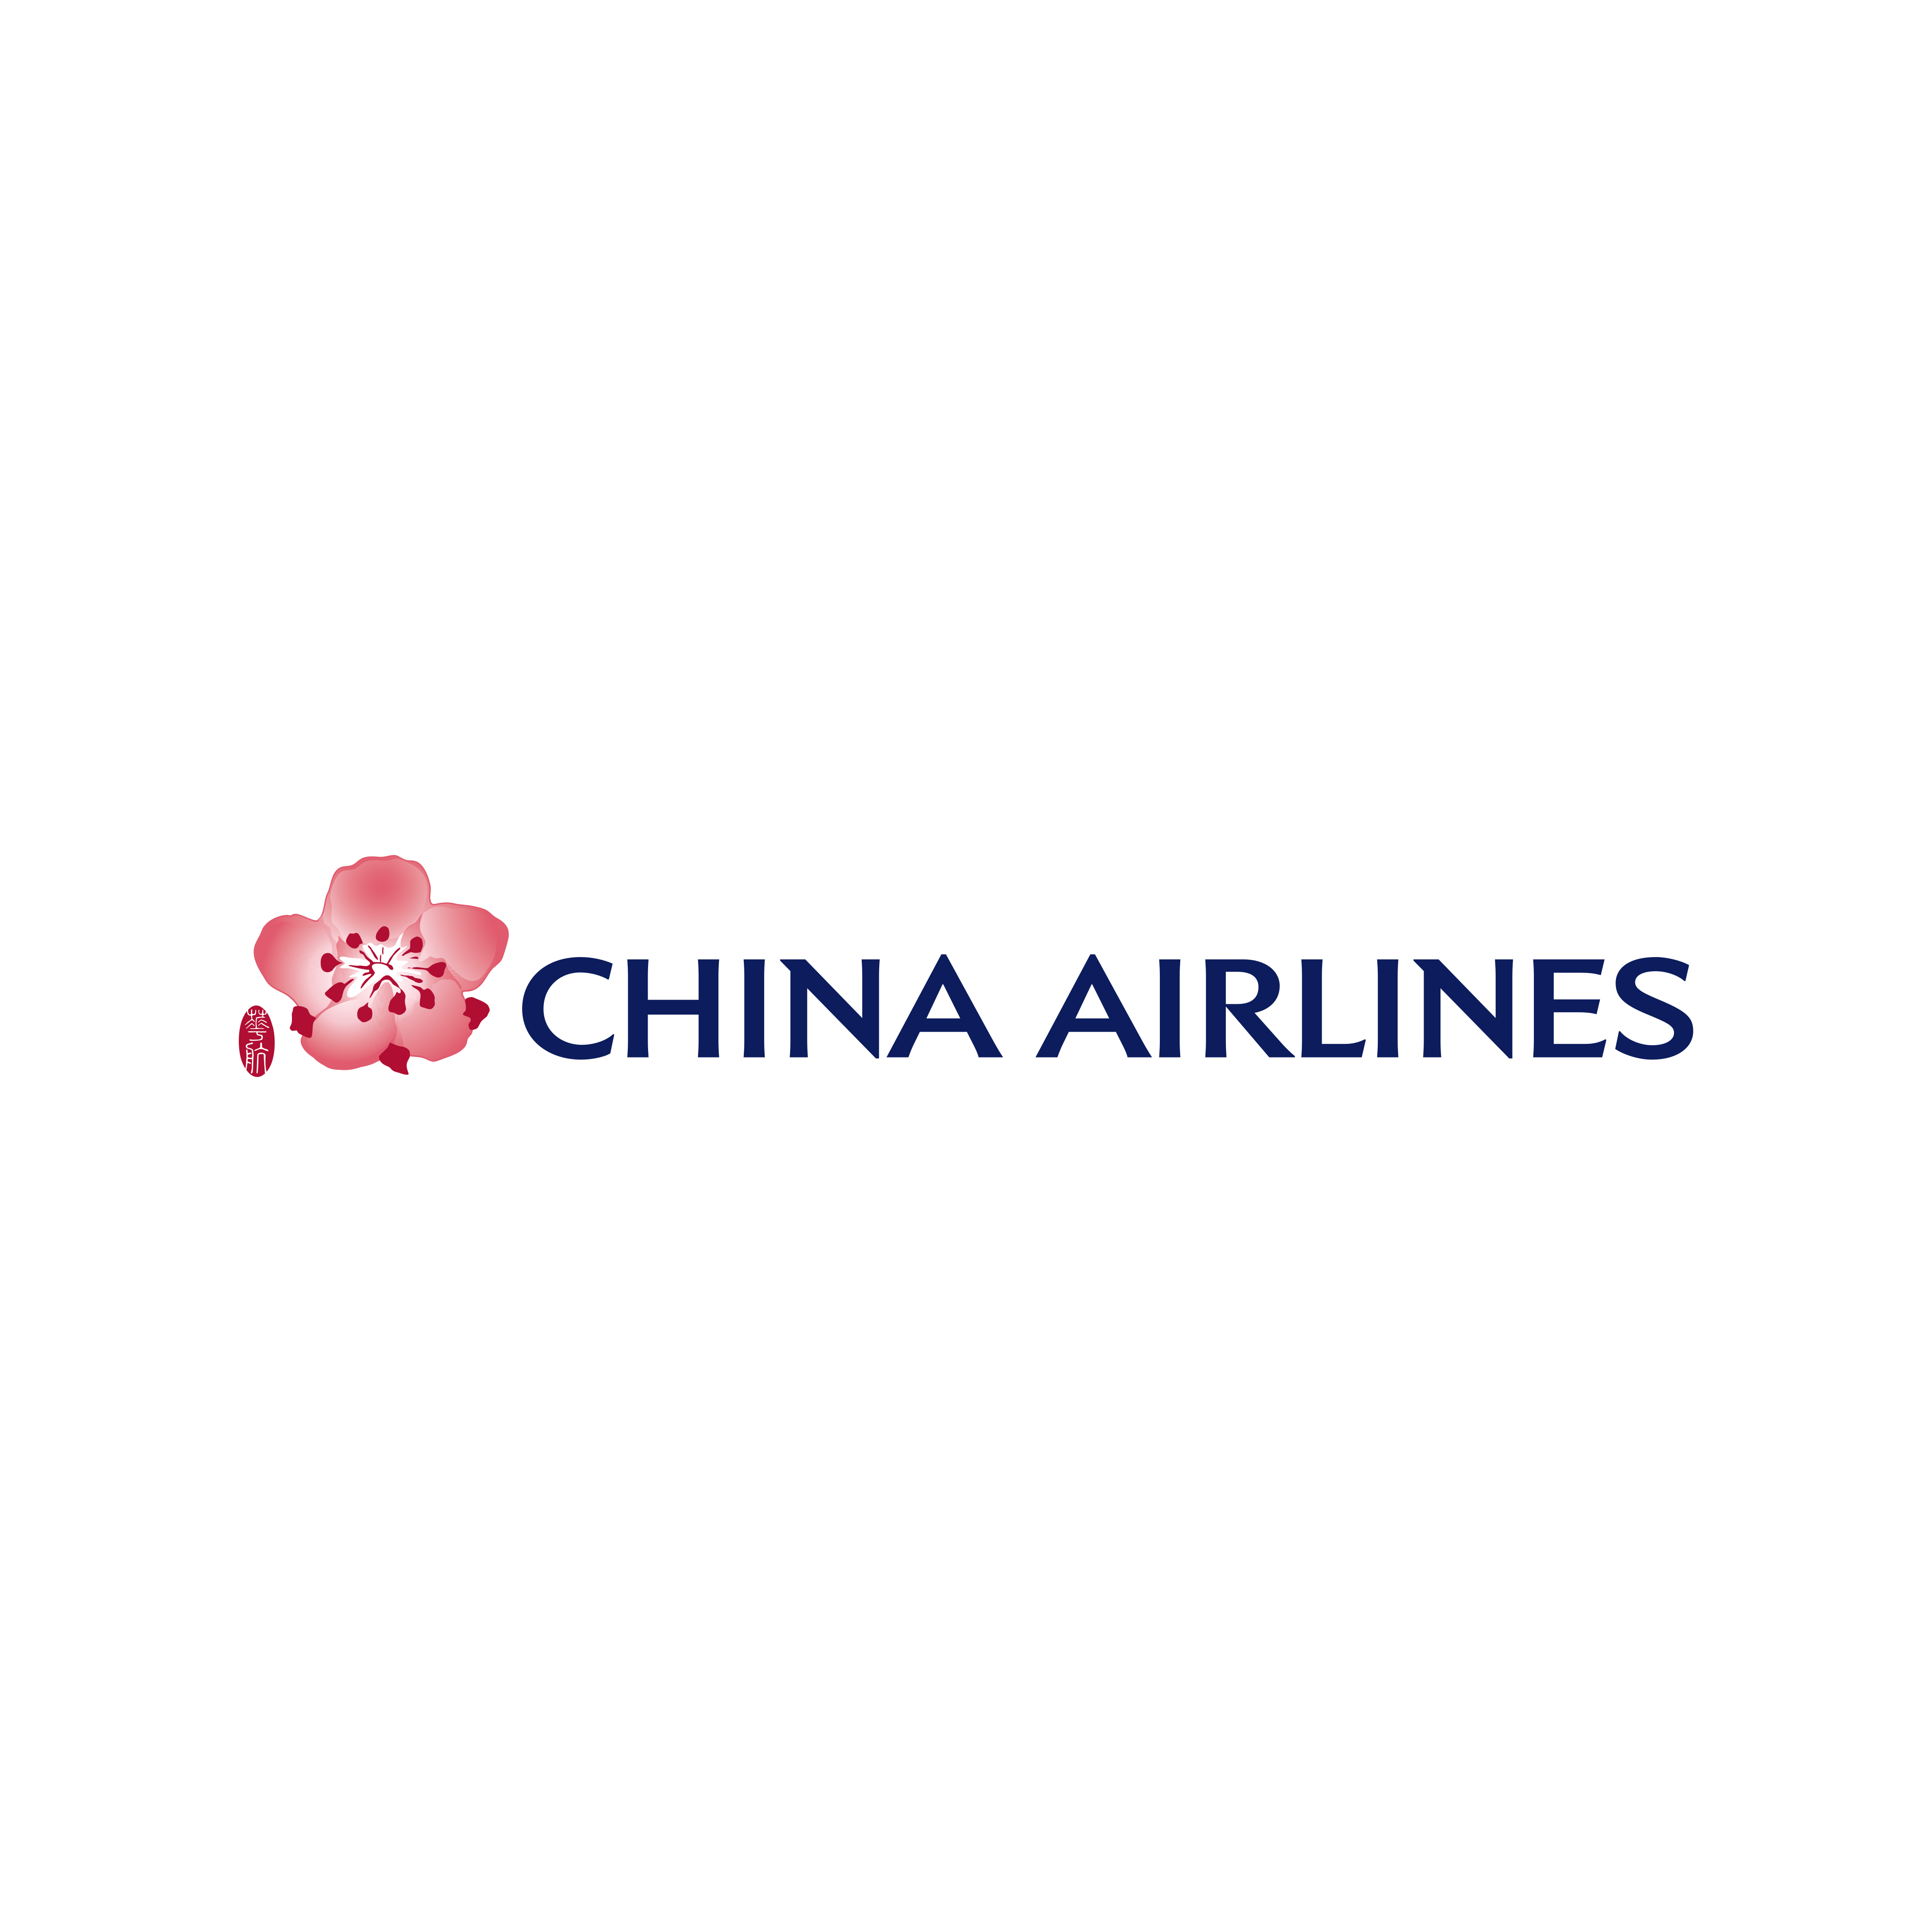 china airlines logo 0 - China Airlines Logo